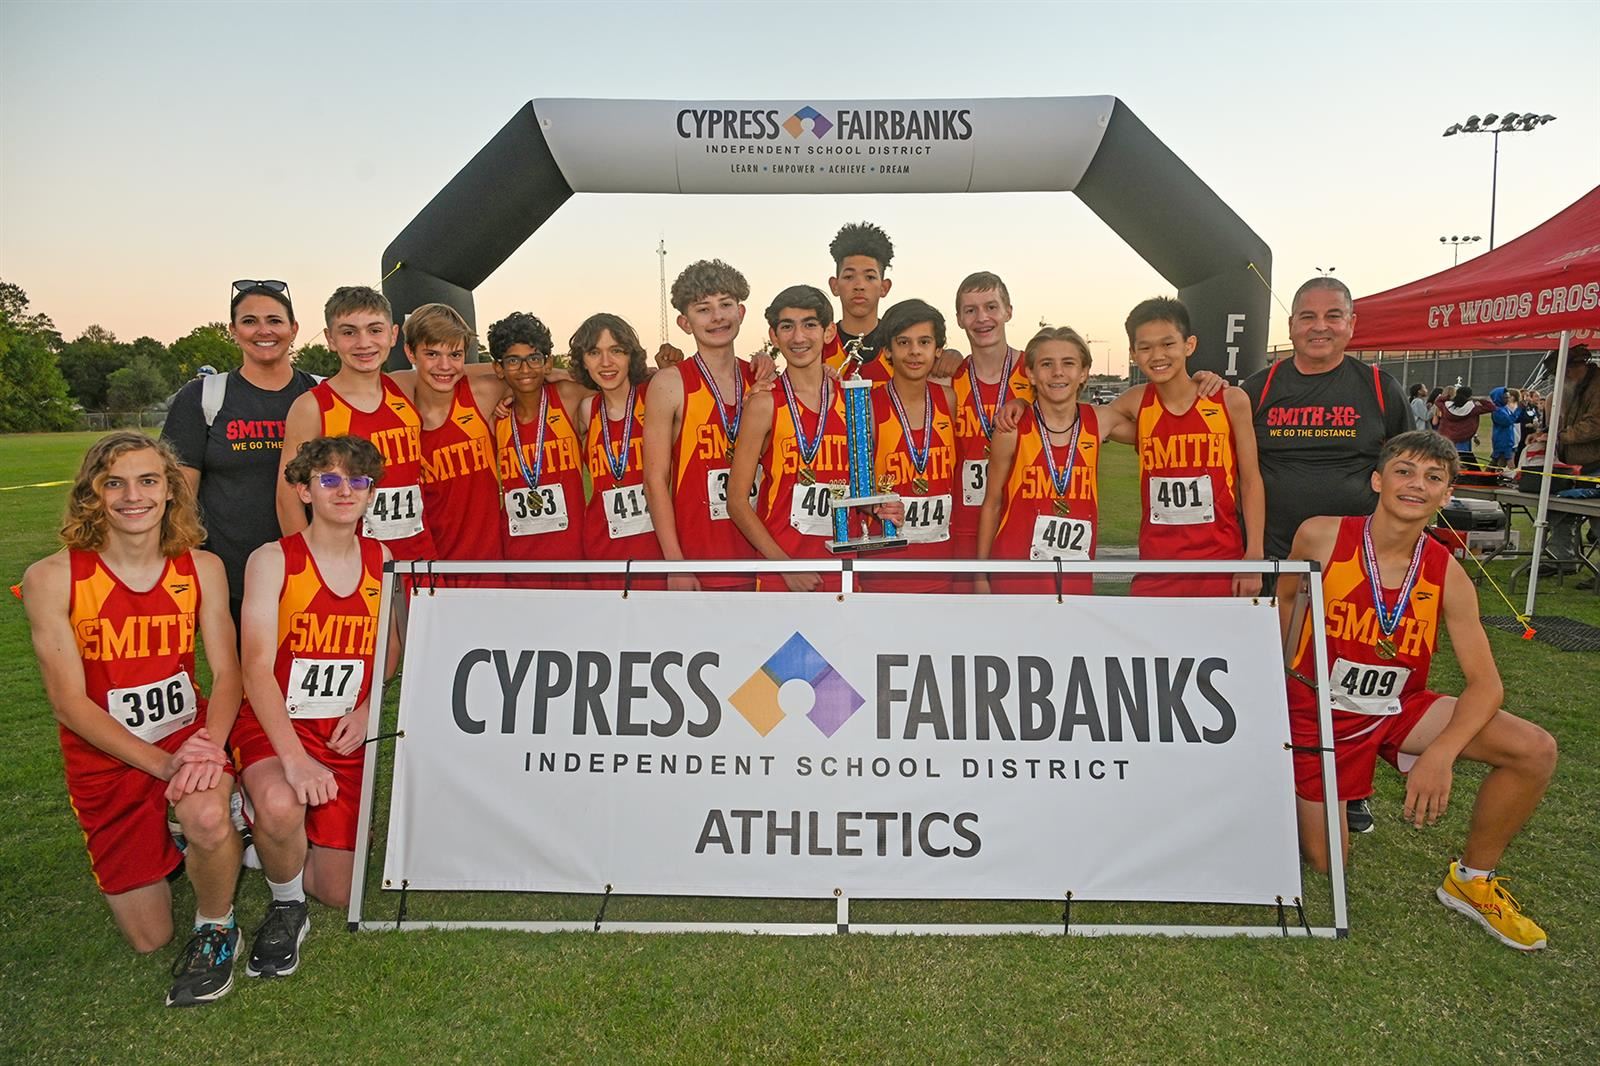 Smith Middle School won the eighth grade boys’ cross country team title with 35 points on Oct. 19 at Cypress Woods.